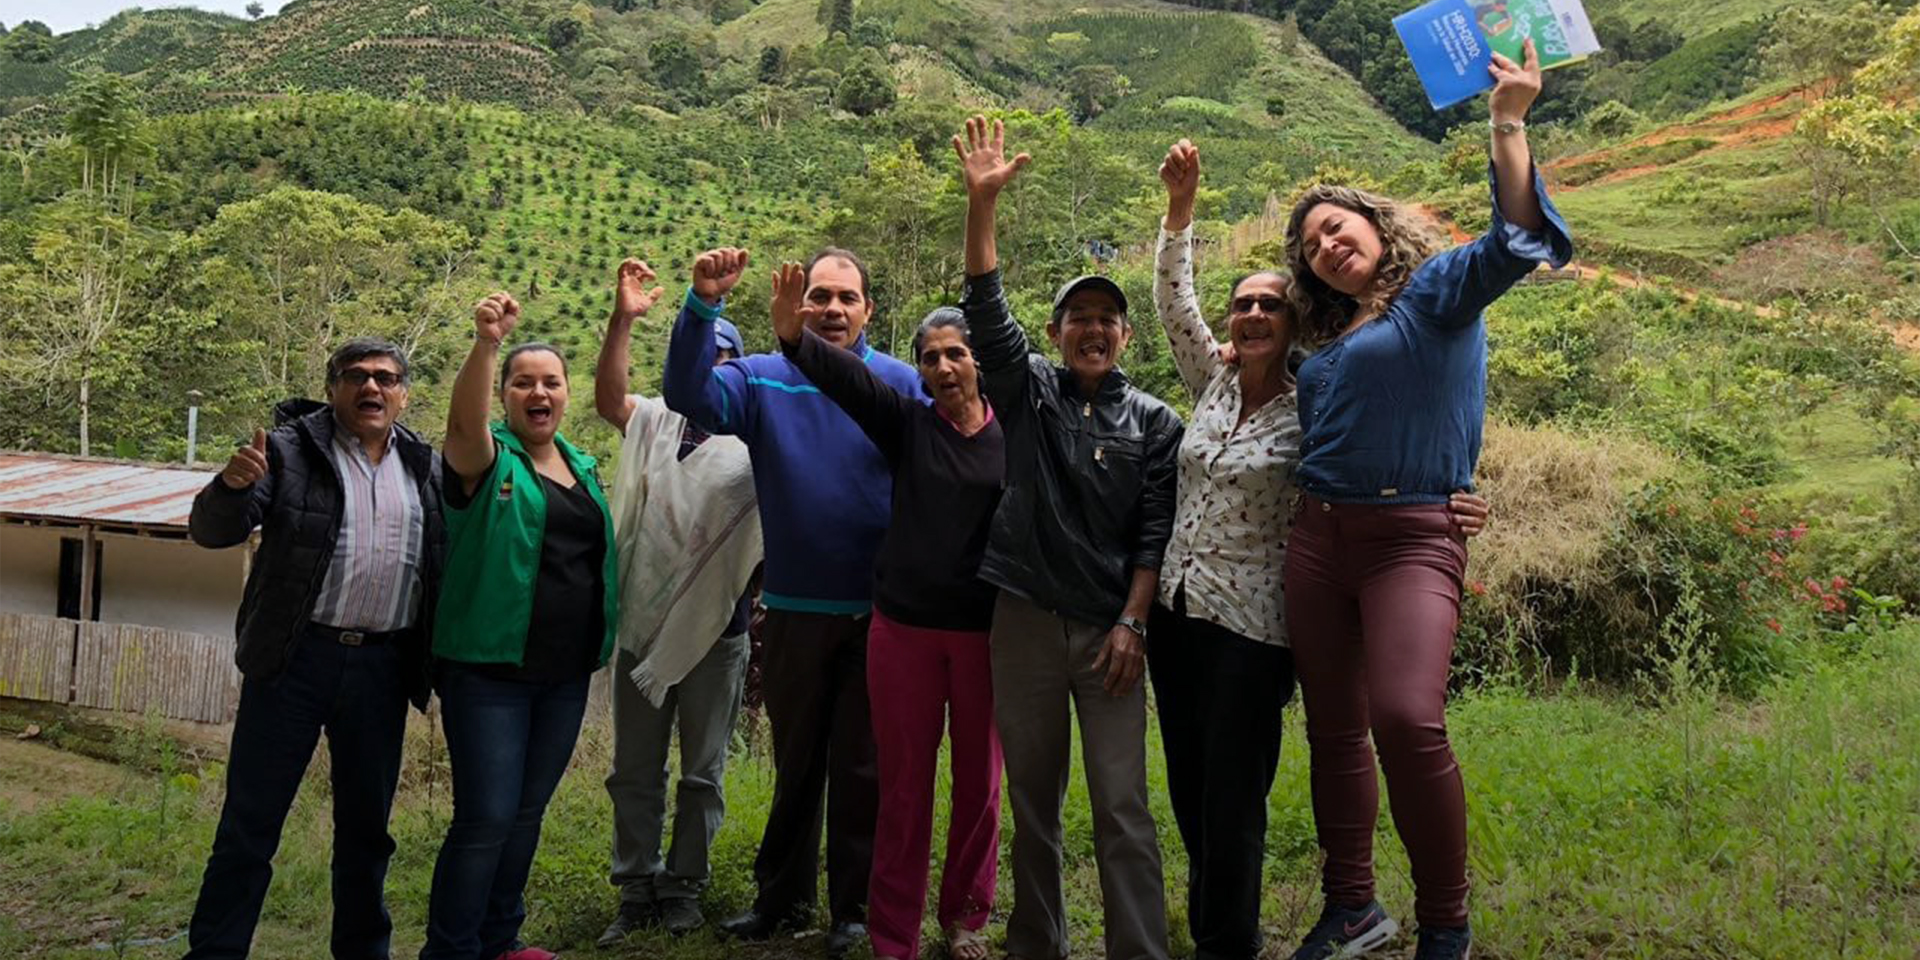 Ivonne Escobar of HRH2030 (right) poses with a group of ICBF social workers, after spending the day with them to evaluate their work in rural Colombian communities.